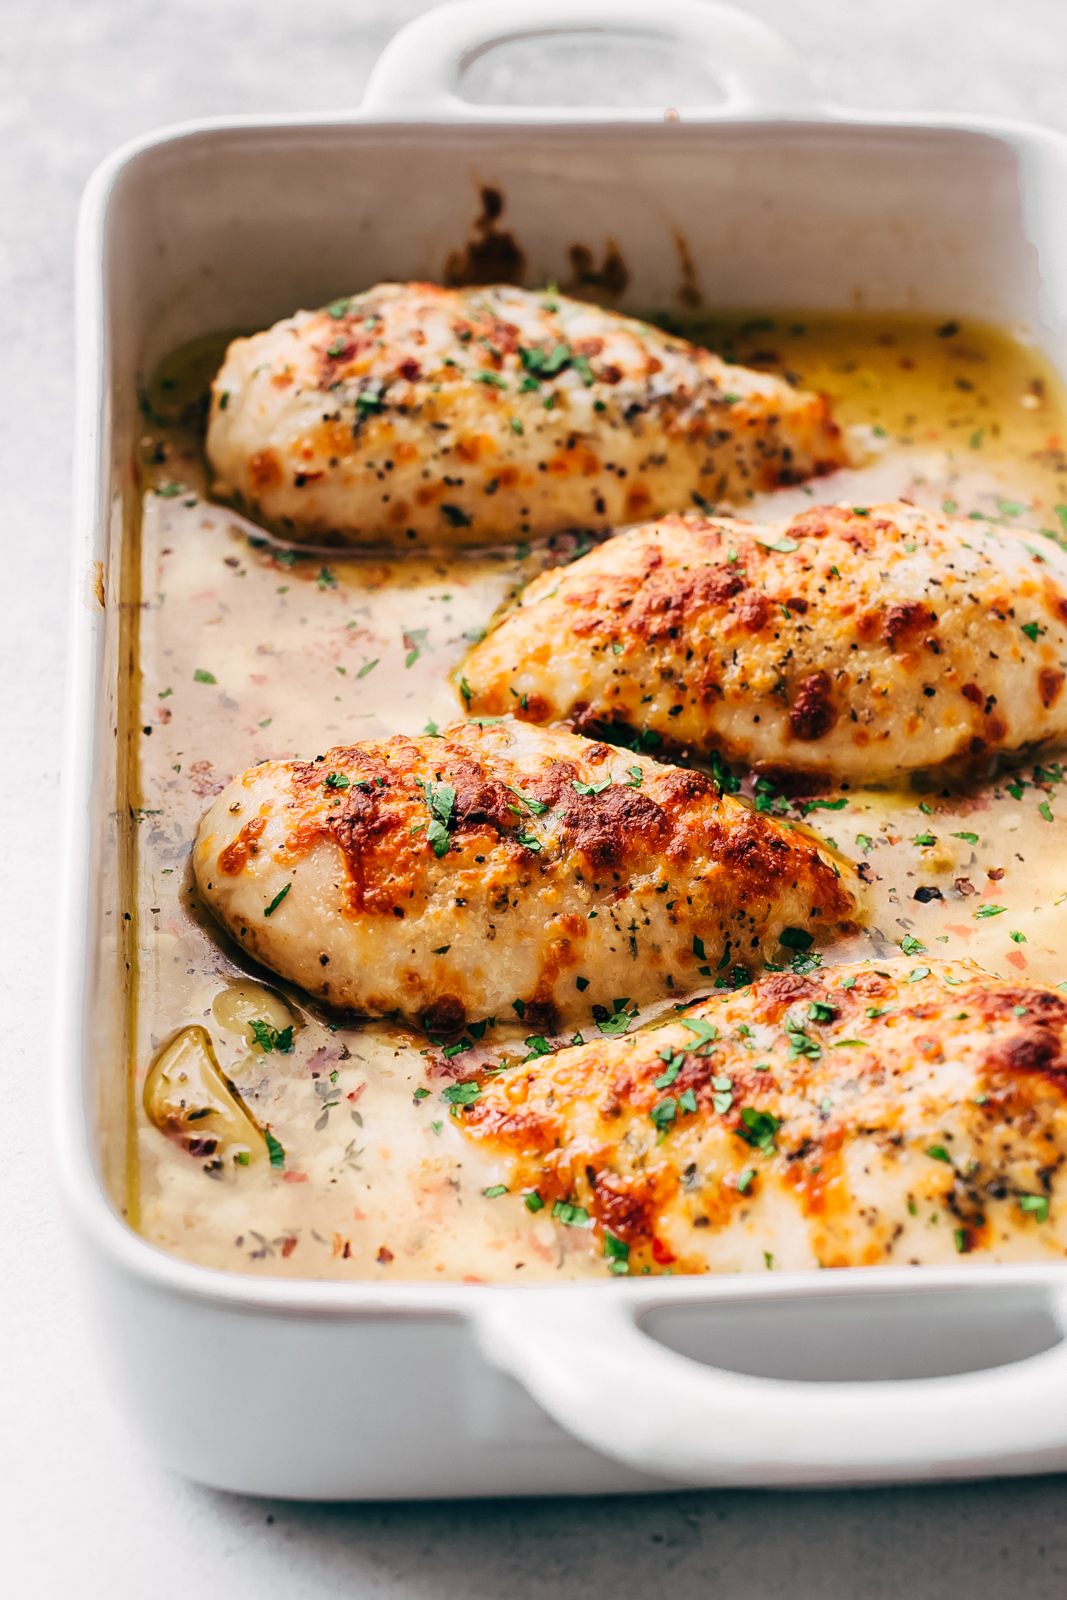 garlic butter sauce with roasted chicken breast with melted cheese in white baking dish